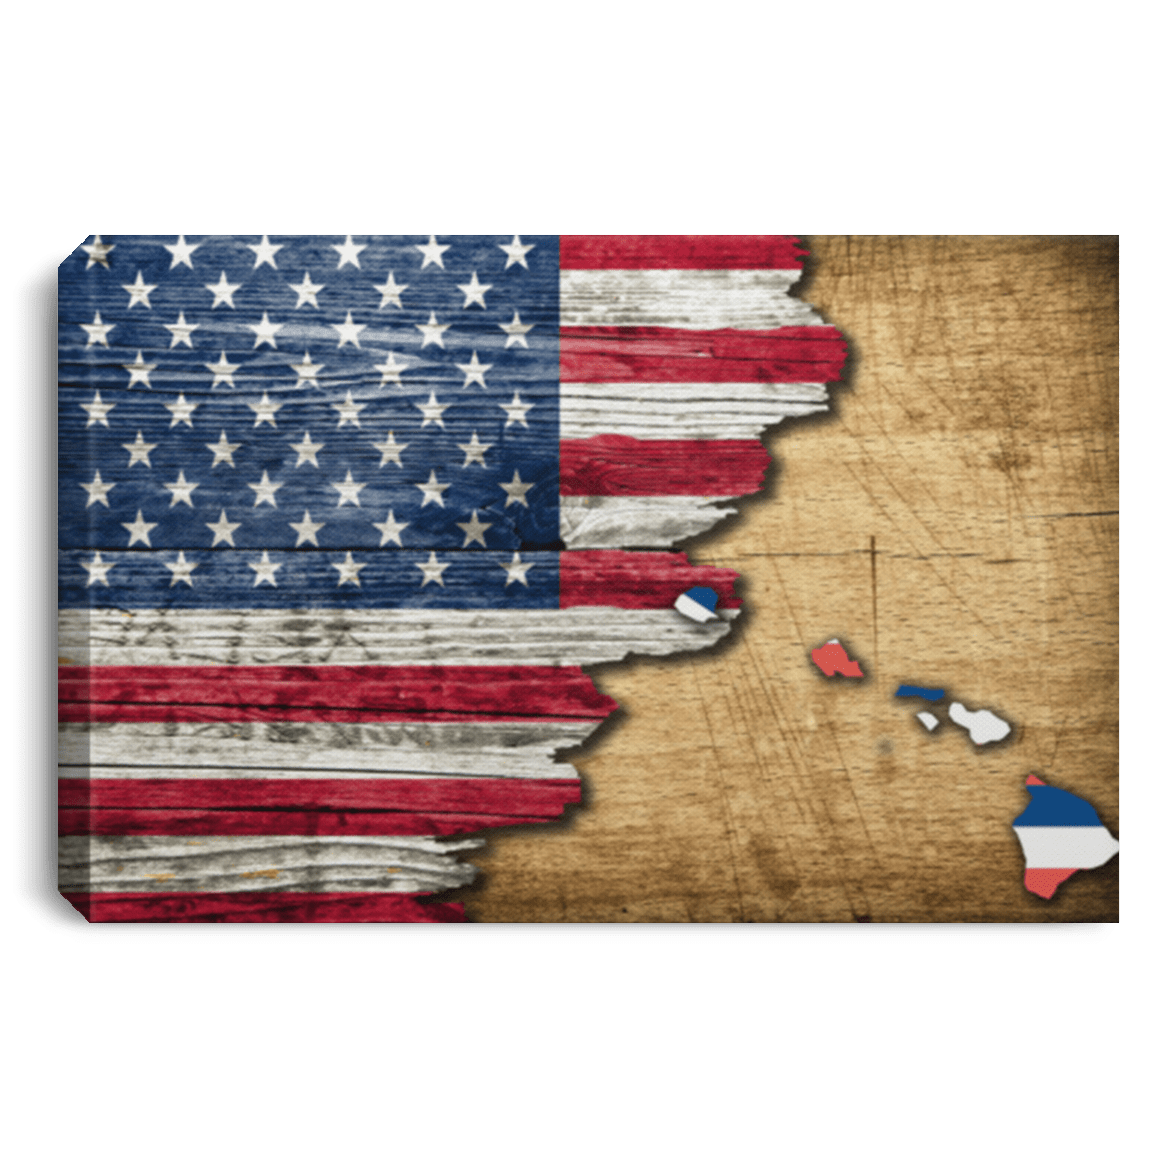 United States/Hawaii Flag Ripped Effect 18X12 Inches Landscape Canvas .75In Frame